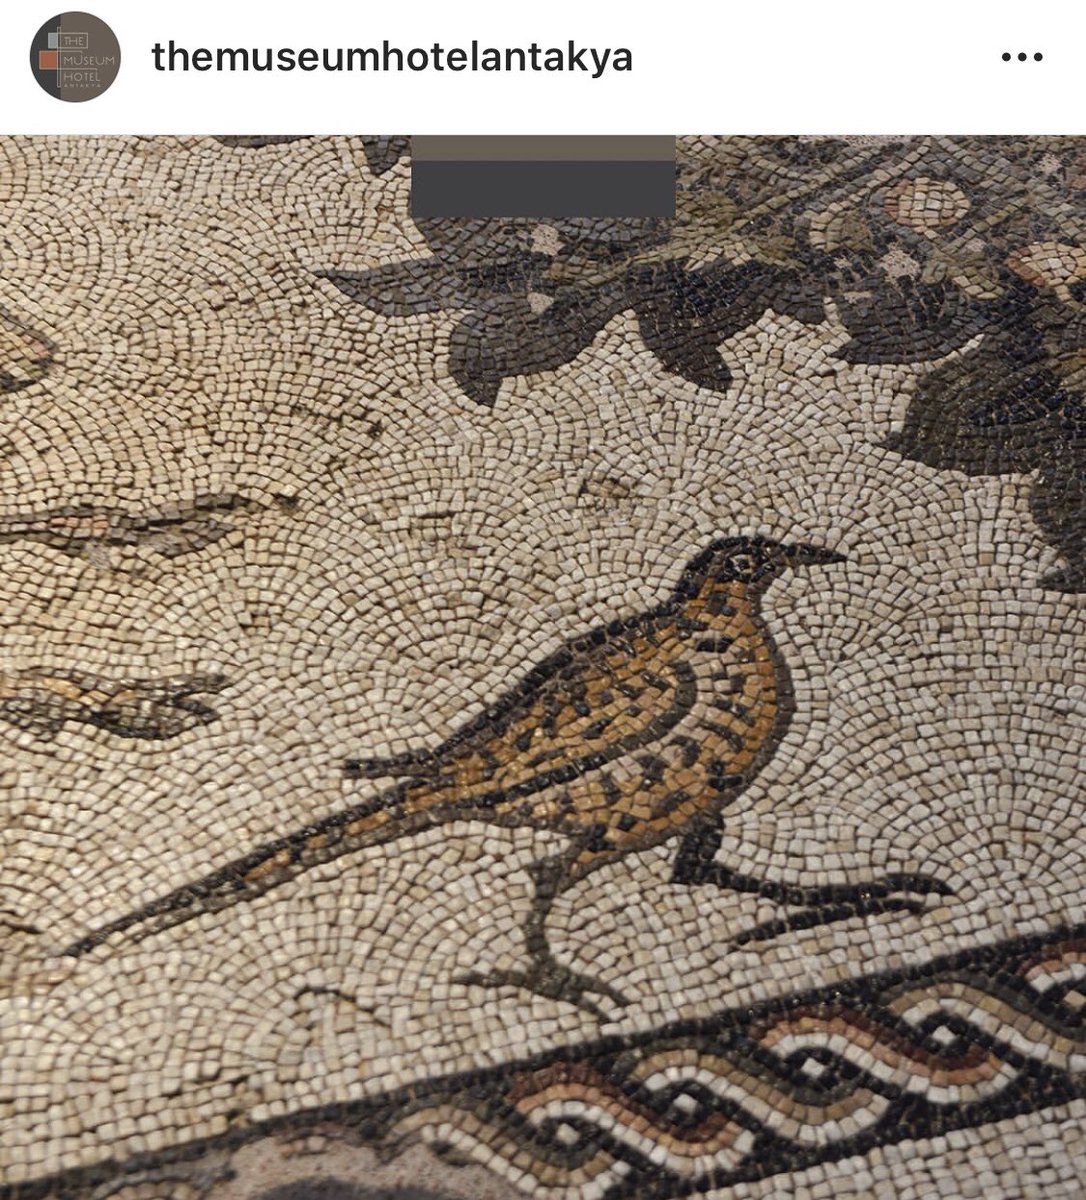 New photos emerge of the astounding ancient mosaics found during the construction of the @themuseumhotel in Antakya, Turkey. The mosaic in the first image is utterly dazzling in its complexity. [Images: Antakya Hotel on Instagram:  https://instagram.com/themuseumhotelantakya?igshid=1xjkh02r3pcos]